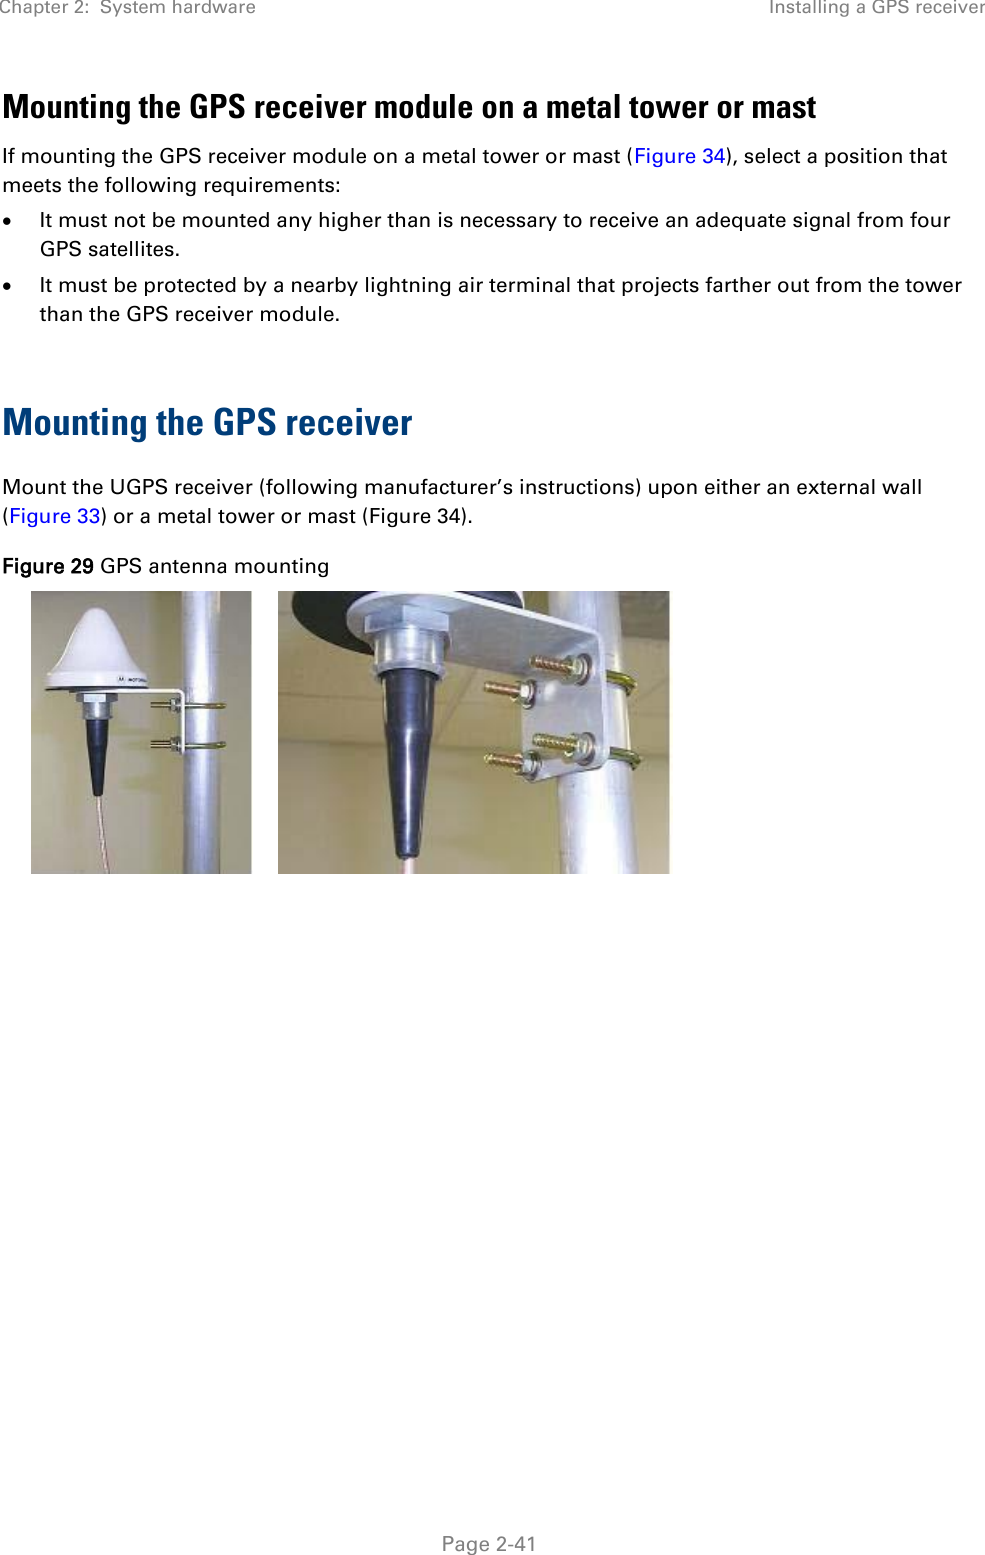 Chapter 2:  System hardware Installing a GPS receiver   Page 2-41 Mounting the GPS receiver module on a metal tower or mast If mounting the GPS receiver module on a metal tower or mast (Figure 34), select a position that meets the following requirements:  It must not be mounted any higher than is necessary to receive an adequate signal from four GPS satellites.  It must be protected by a nearby lightning air terminal that projects farther out from the tower than the GPS receiver module.  Mounting the GPS receiver Mount the UGPS receiver (following manufacturer’s instructions) upon either an external wall (Figure 33) or a metal tower or mast (Figure 34). Figure 29 GPS antenna mounting     